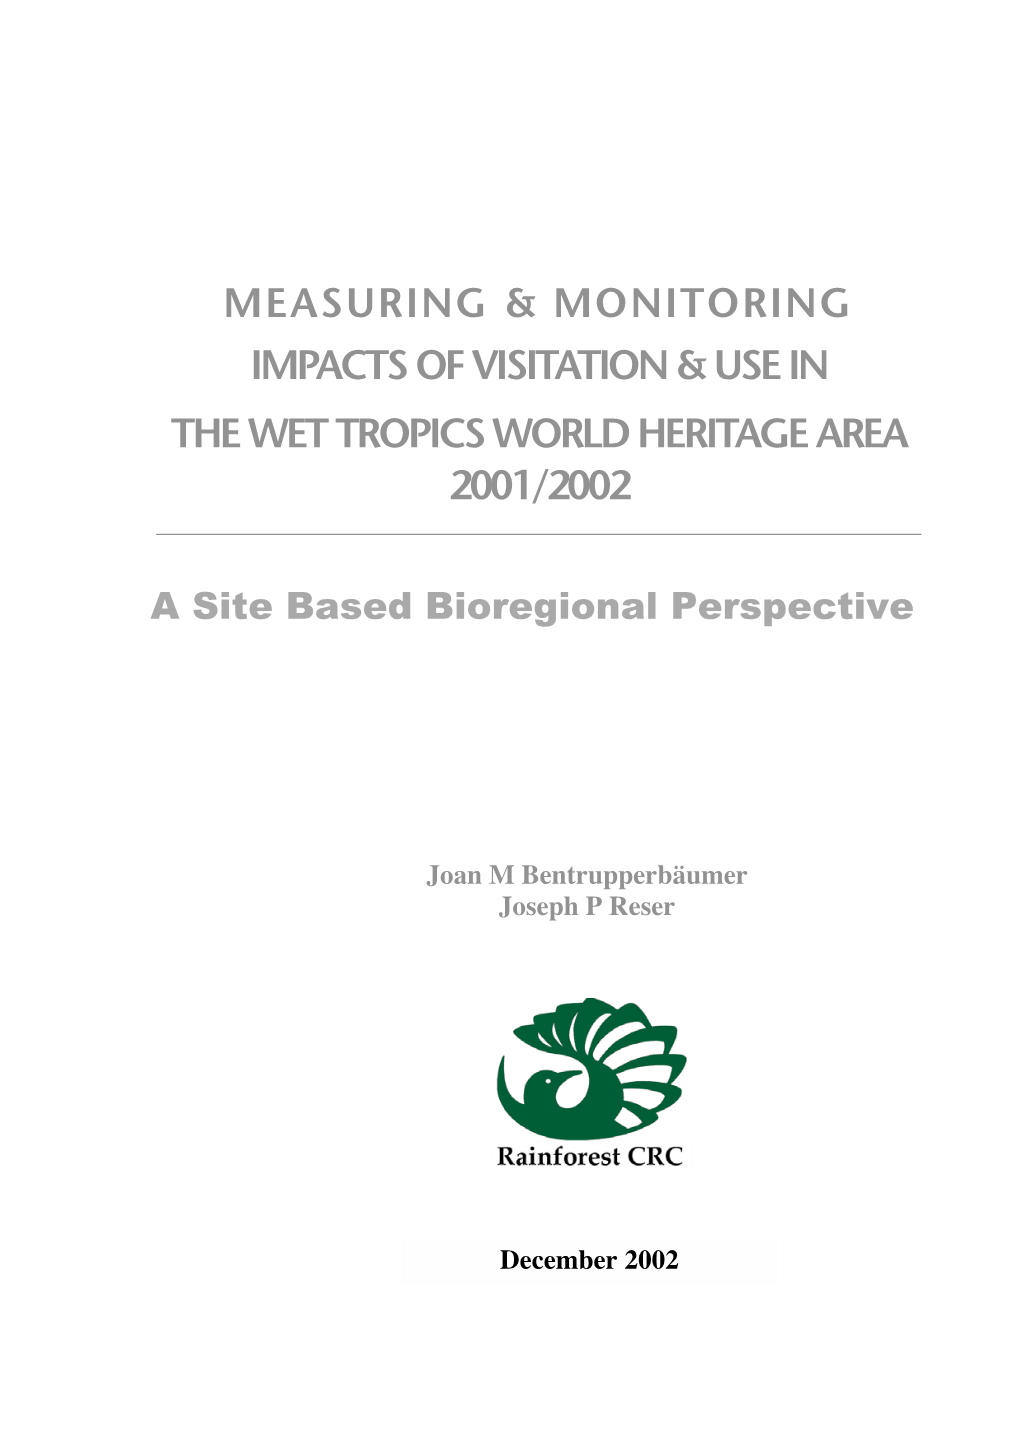 Measuring & Monitoring Impacts of Visitation & Use in the Wet Tropics World Heritage Area 2001/2002